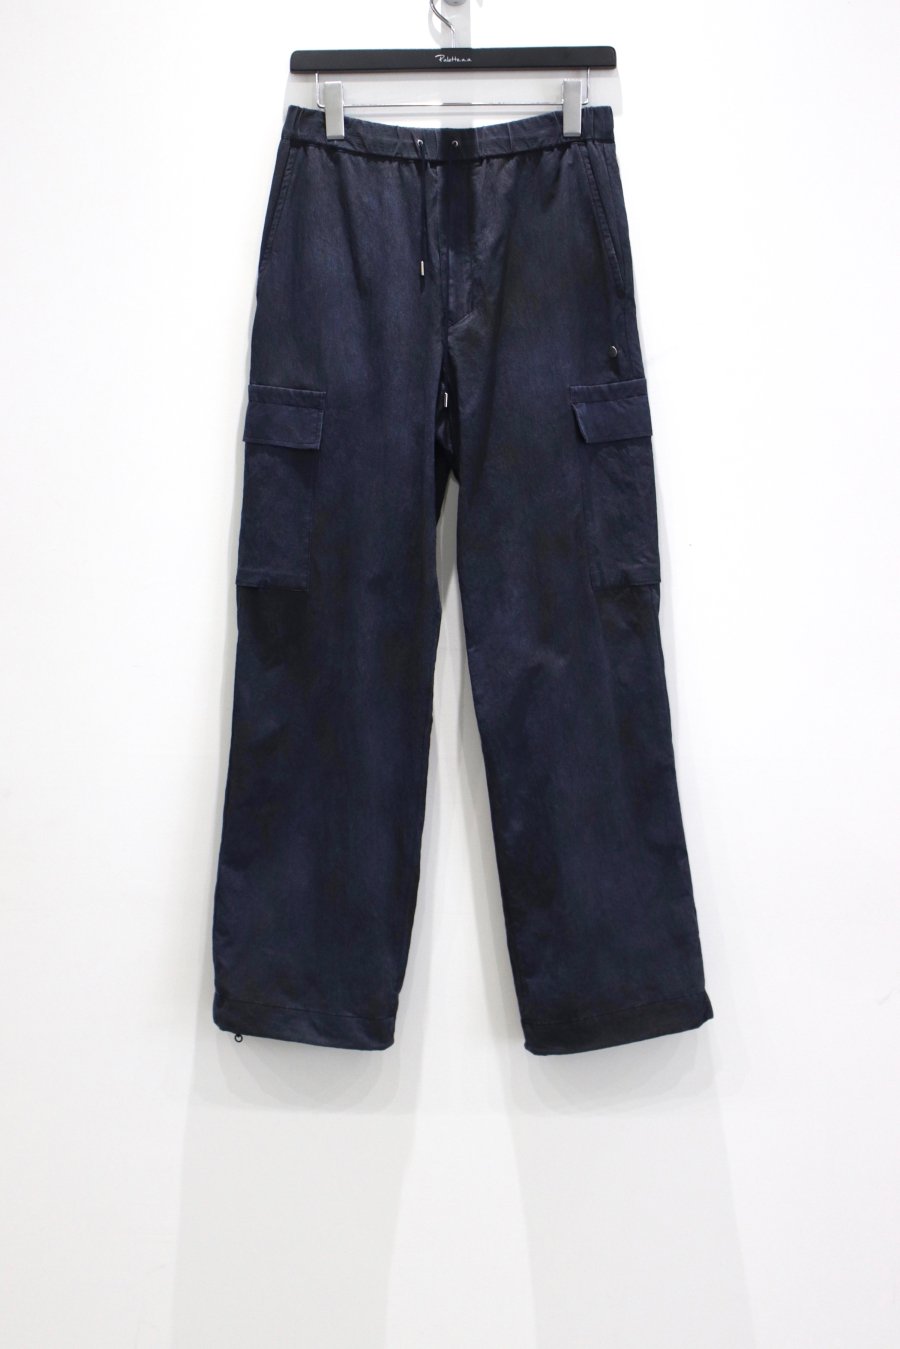 NULABEL  GRAMENT DYED FIELD TROUSERS<img class='new_mark_img2' src='https://img.shop-pro.jp/img/new/icons15.gif' style='border:none;display:inline;margin:0px;padding:0px;width:auto;' />